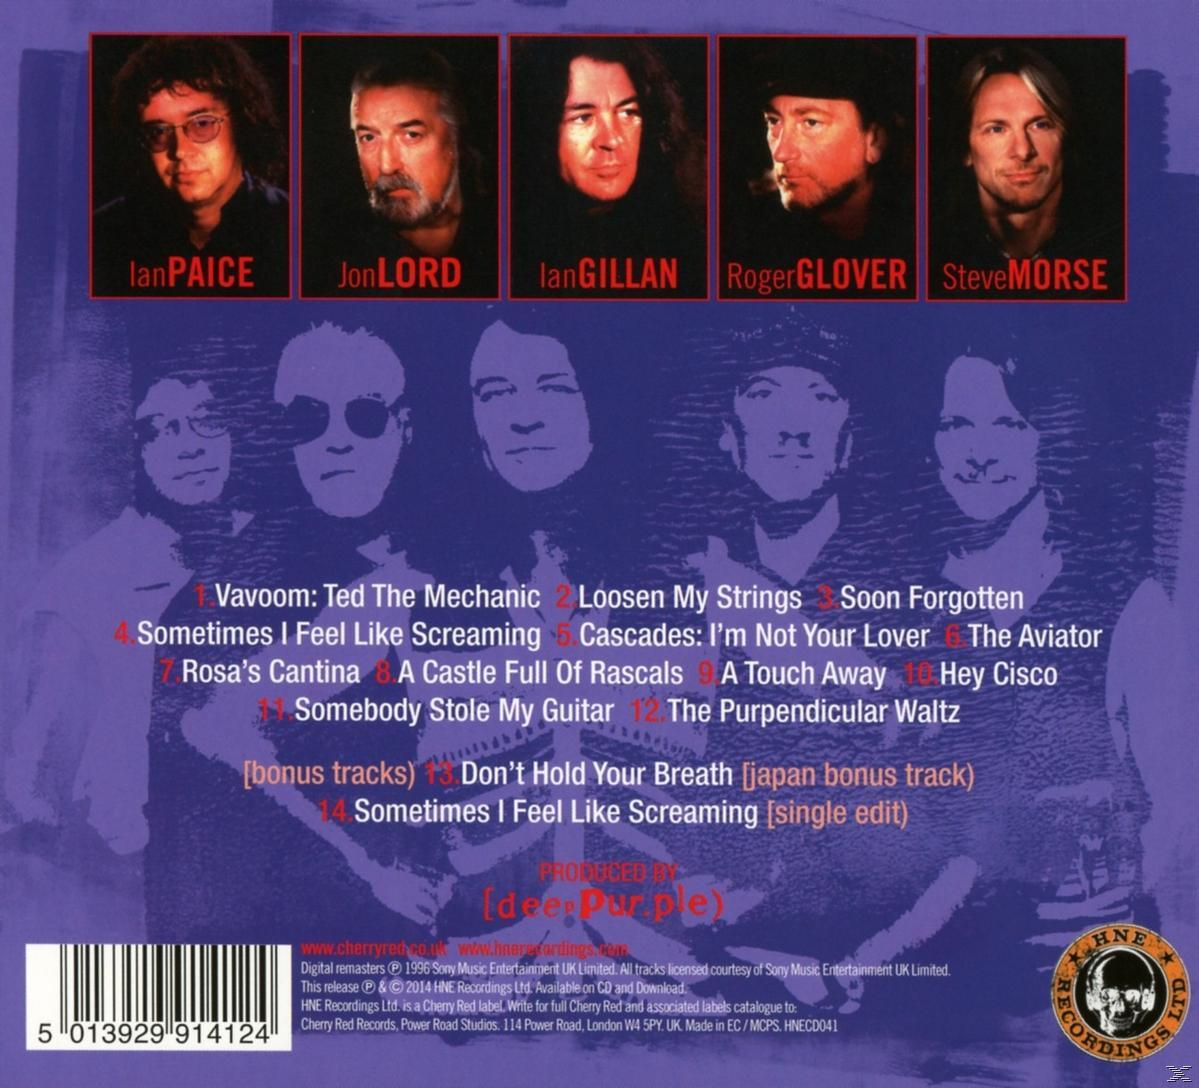 (Expanded Purple (CD) Deep - Version) - Purpendicular